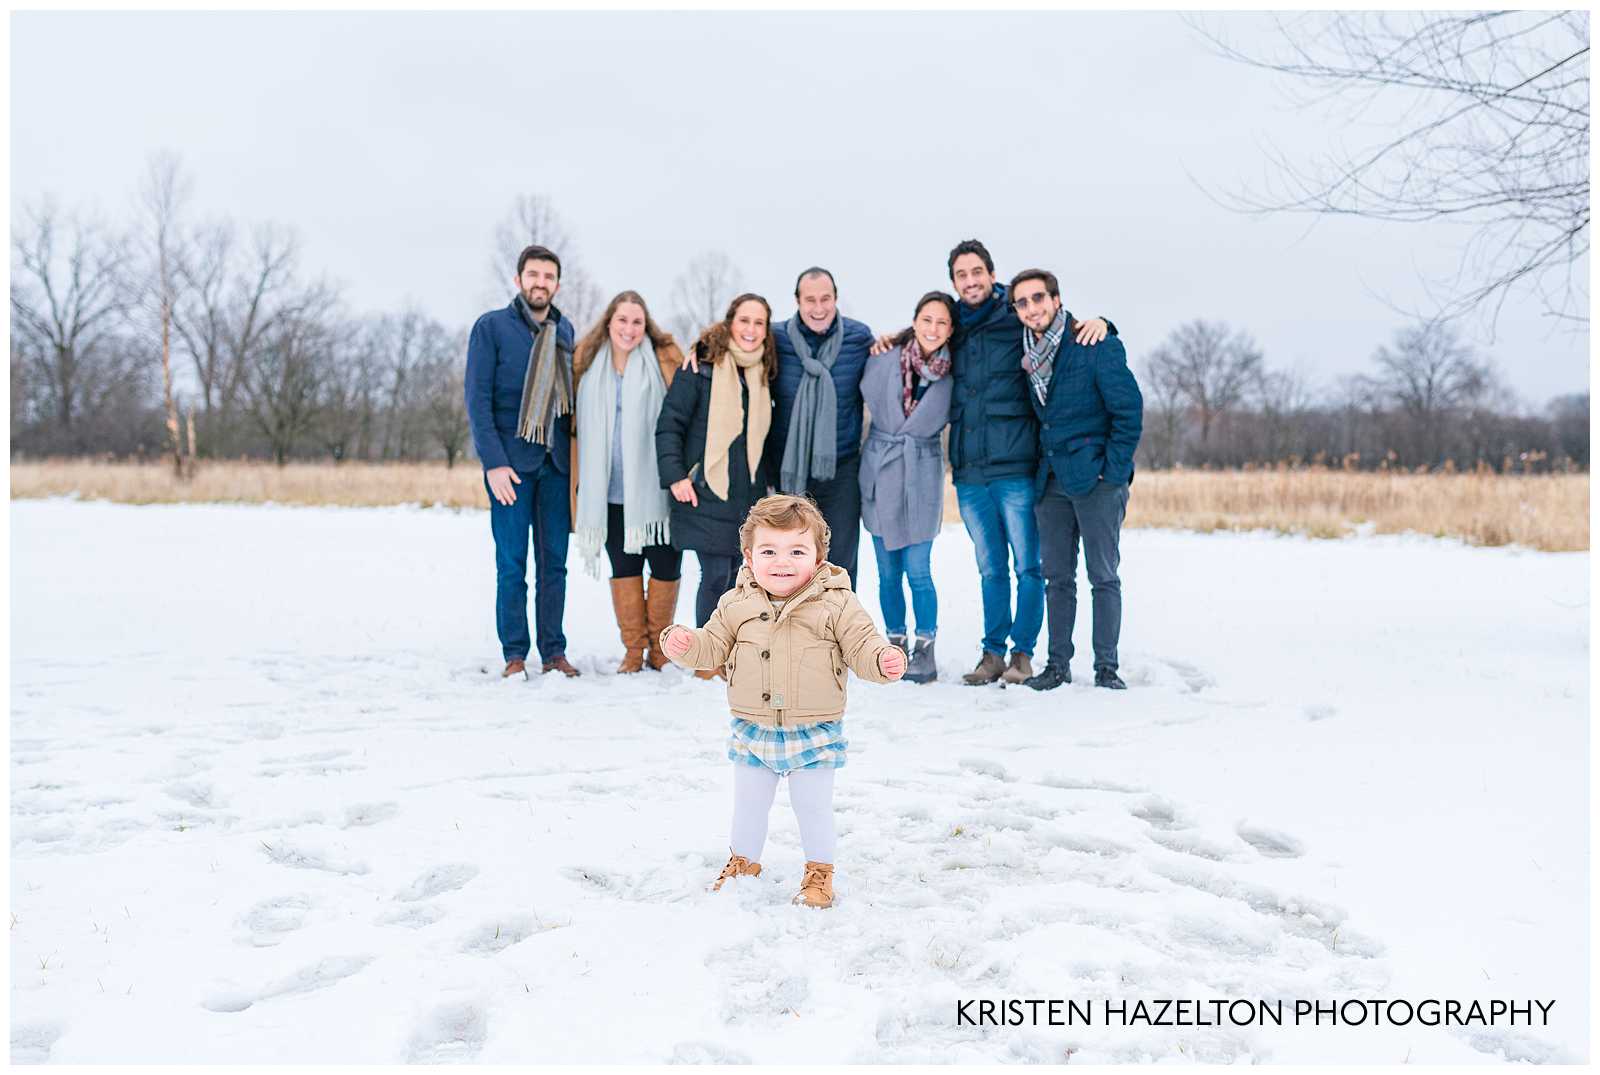 Extended family photoshoot in the snow by Chicago family photographer Kristen Hazelton